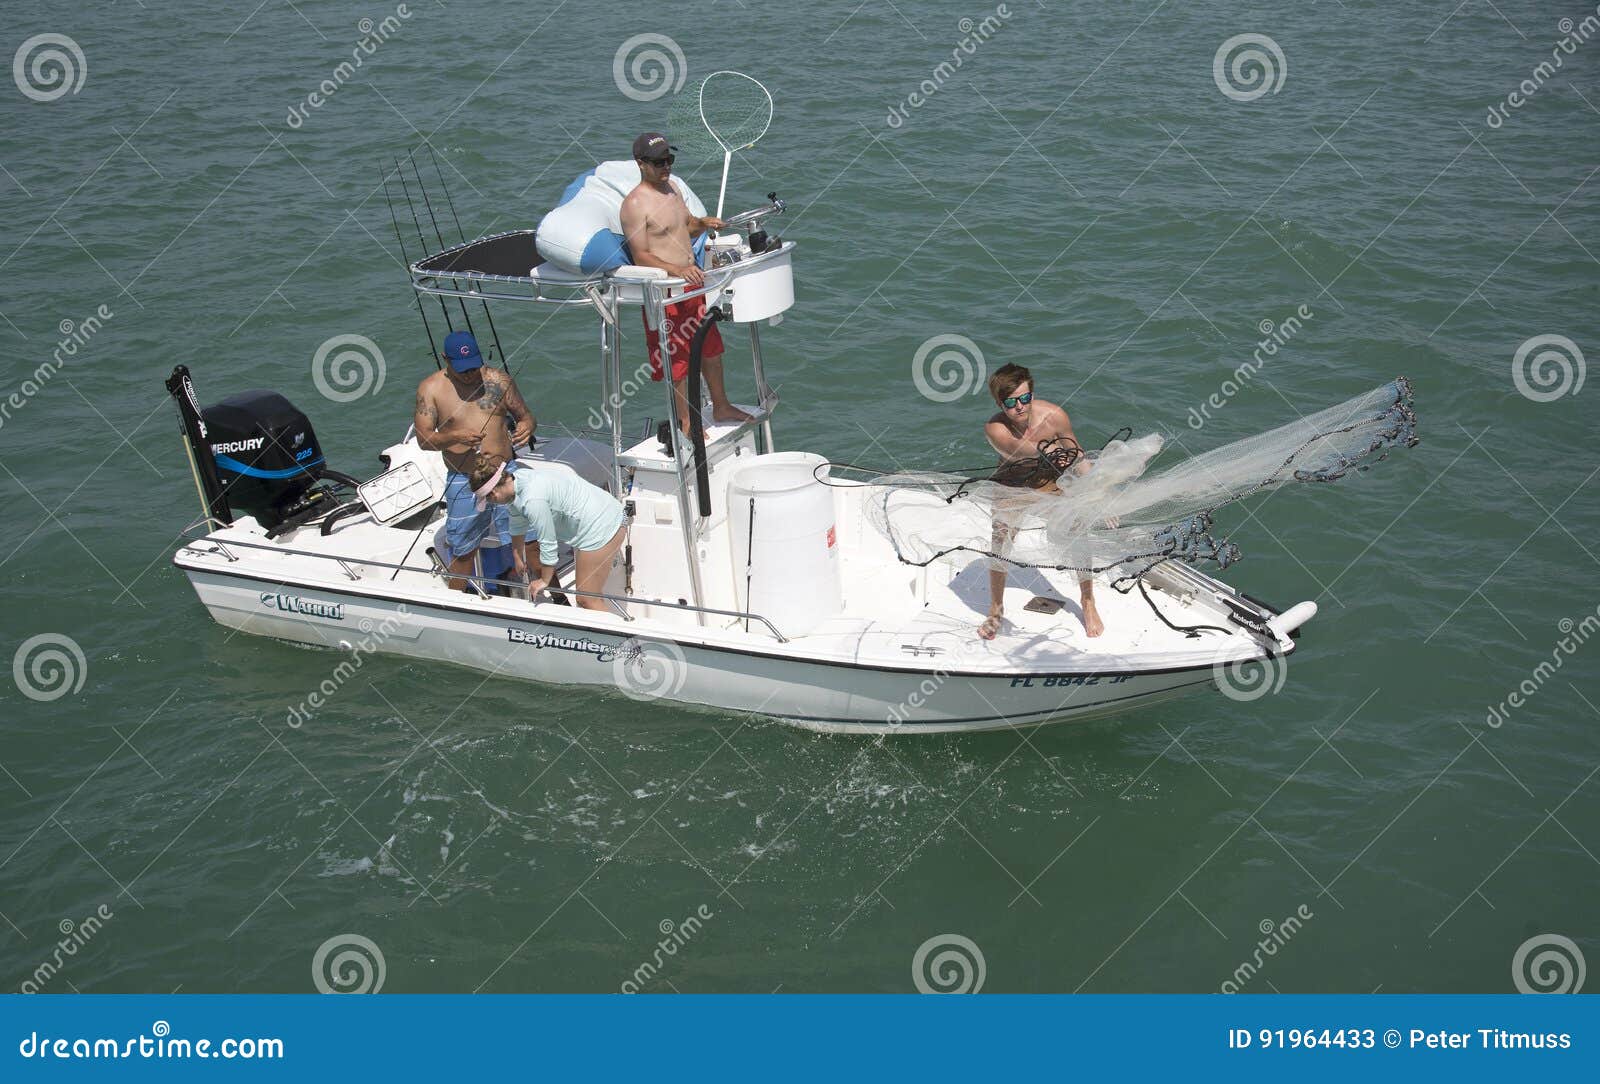 https://thumbs.dreamstime.com/z/fisherman-casting-cast-net-small-fishing-boat-bait-using-gulf-mexico-southern-florida-usa-may-91964433.jpg